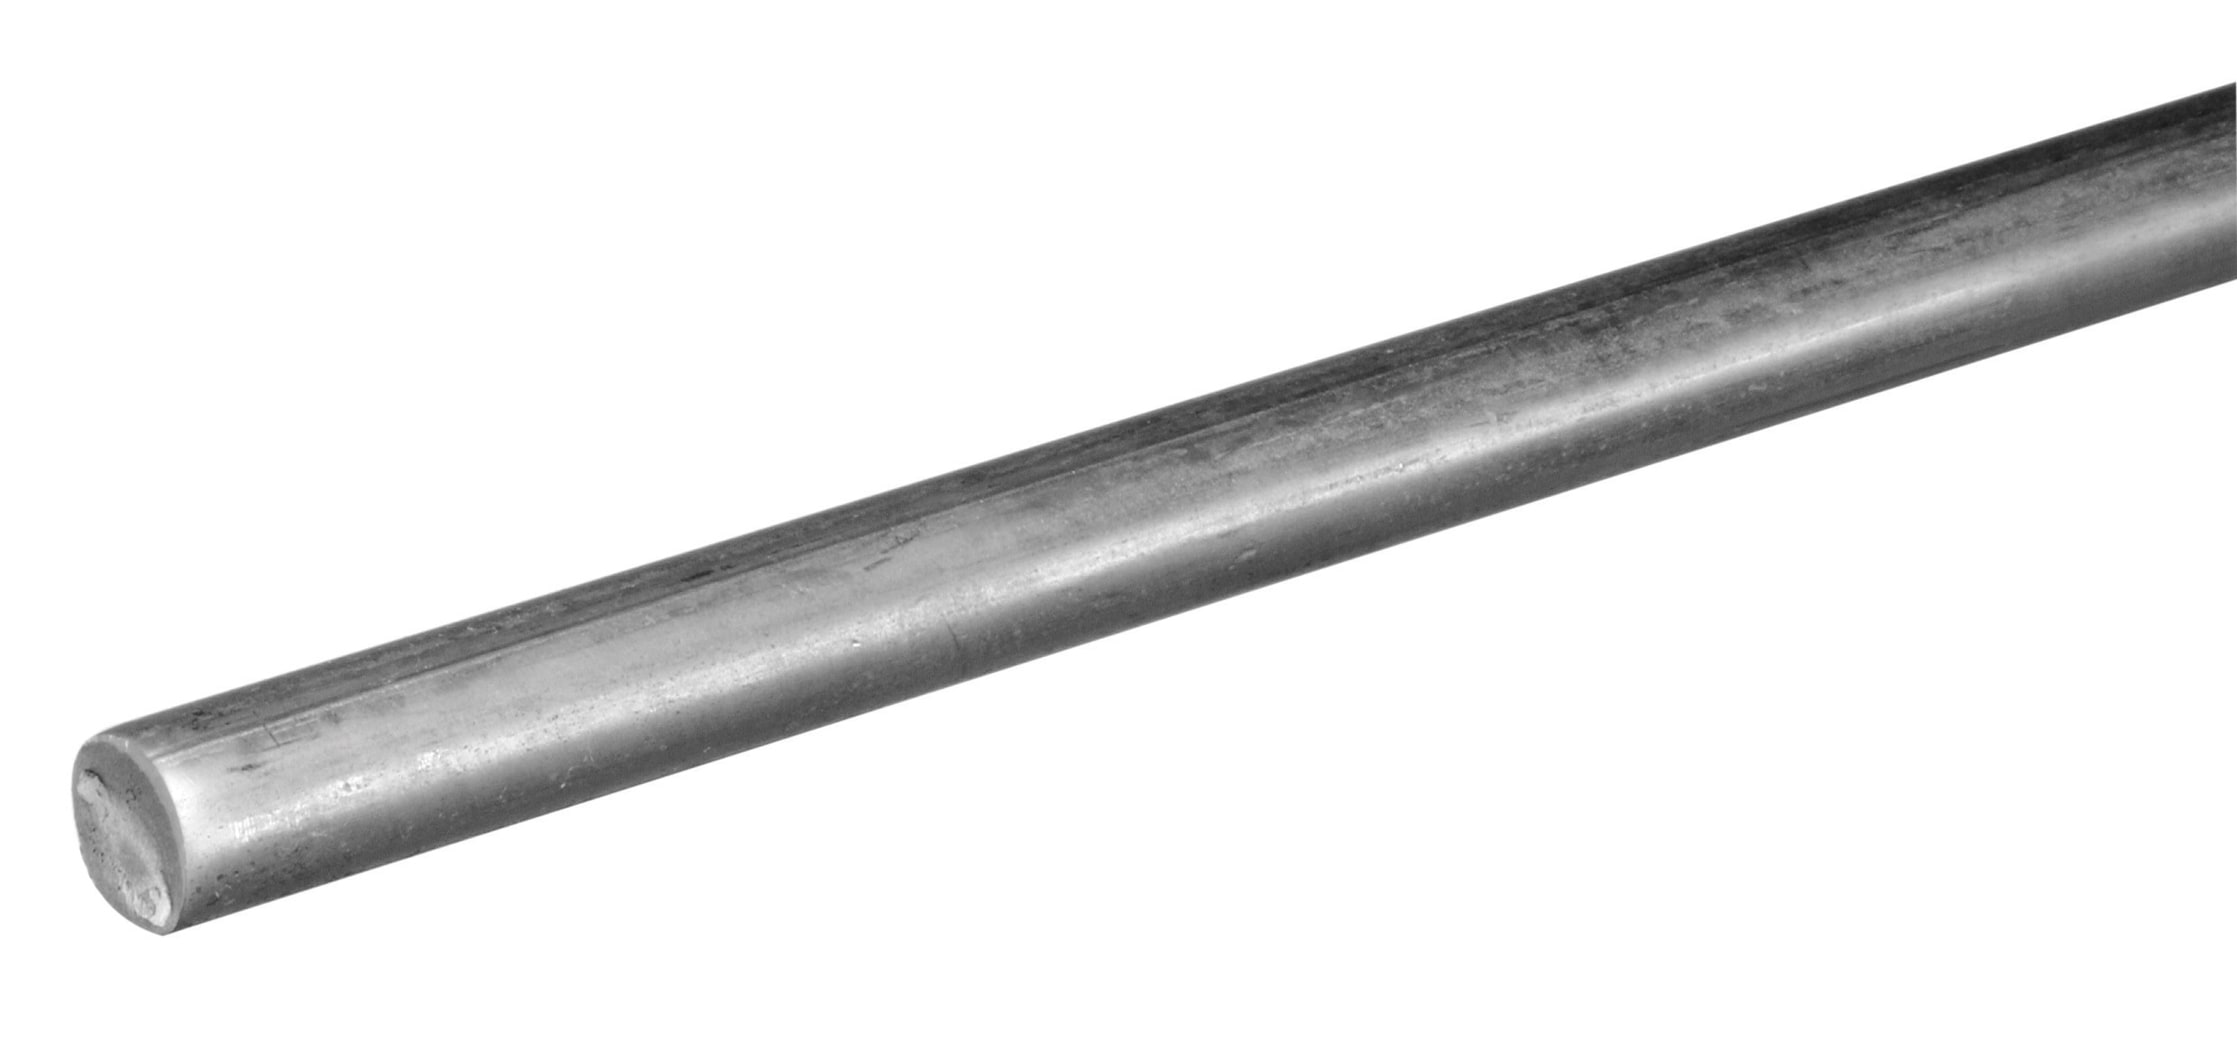 Slotted Spring Pin 3/16 x 3 Carbon Steel Zinc Clear